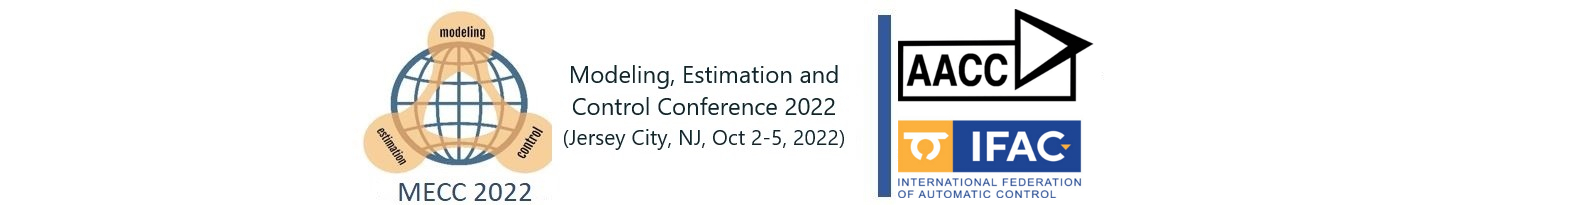 	Modeling, Estimation and Control Conference - 2nd MECC 2022